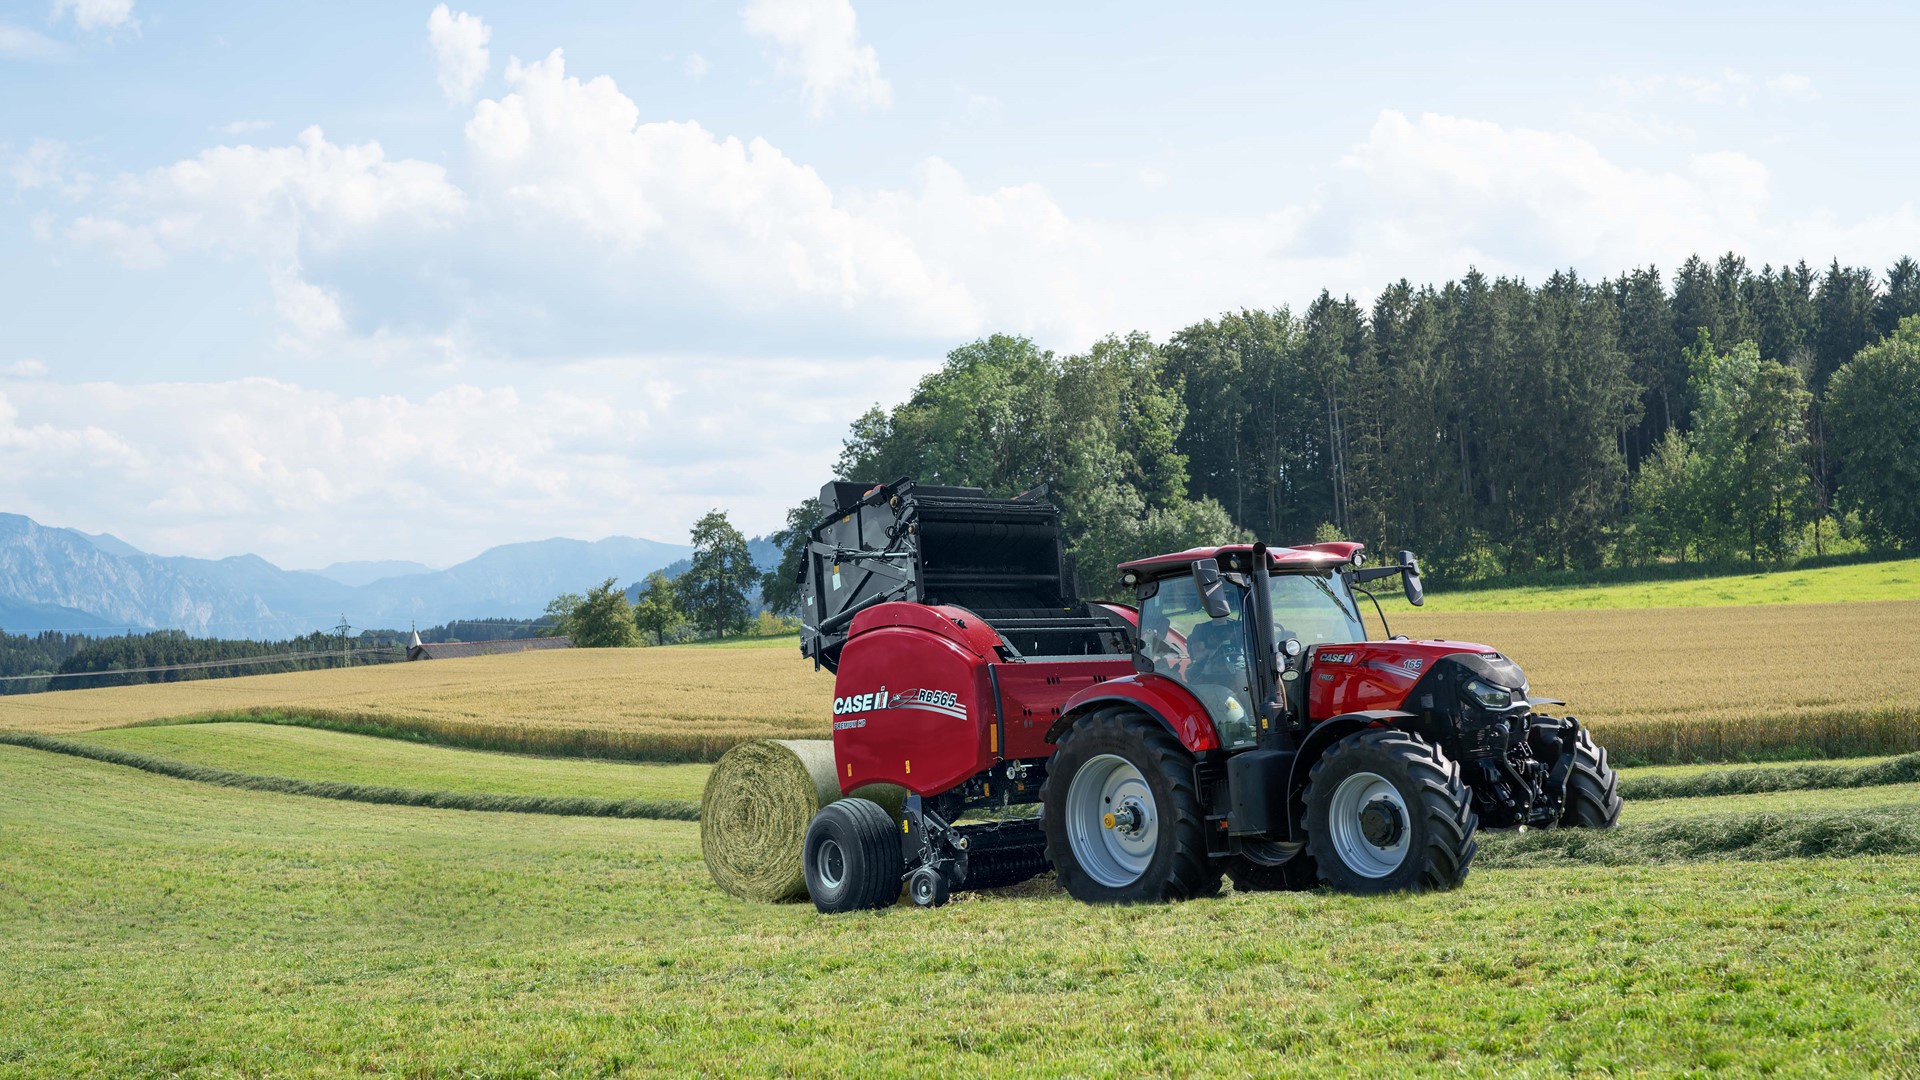 Updated Model Year 2021 Puma series tractors deliver increased service intervals